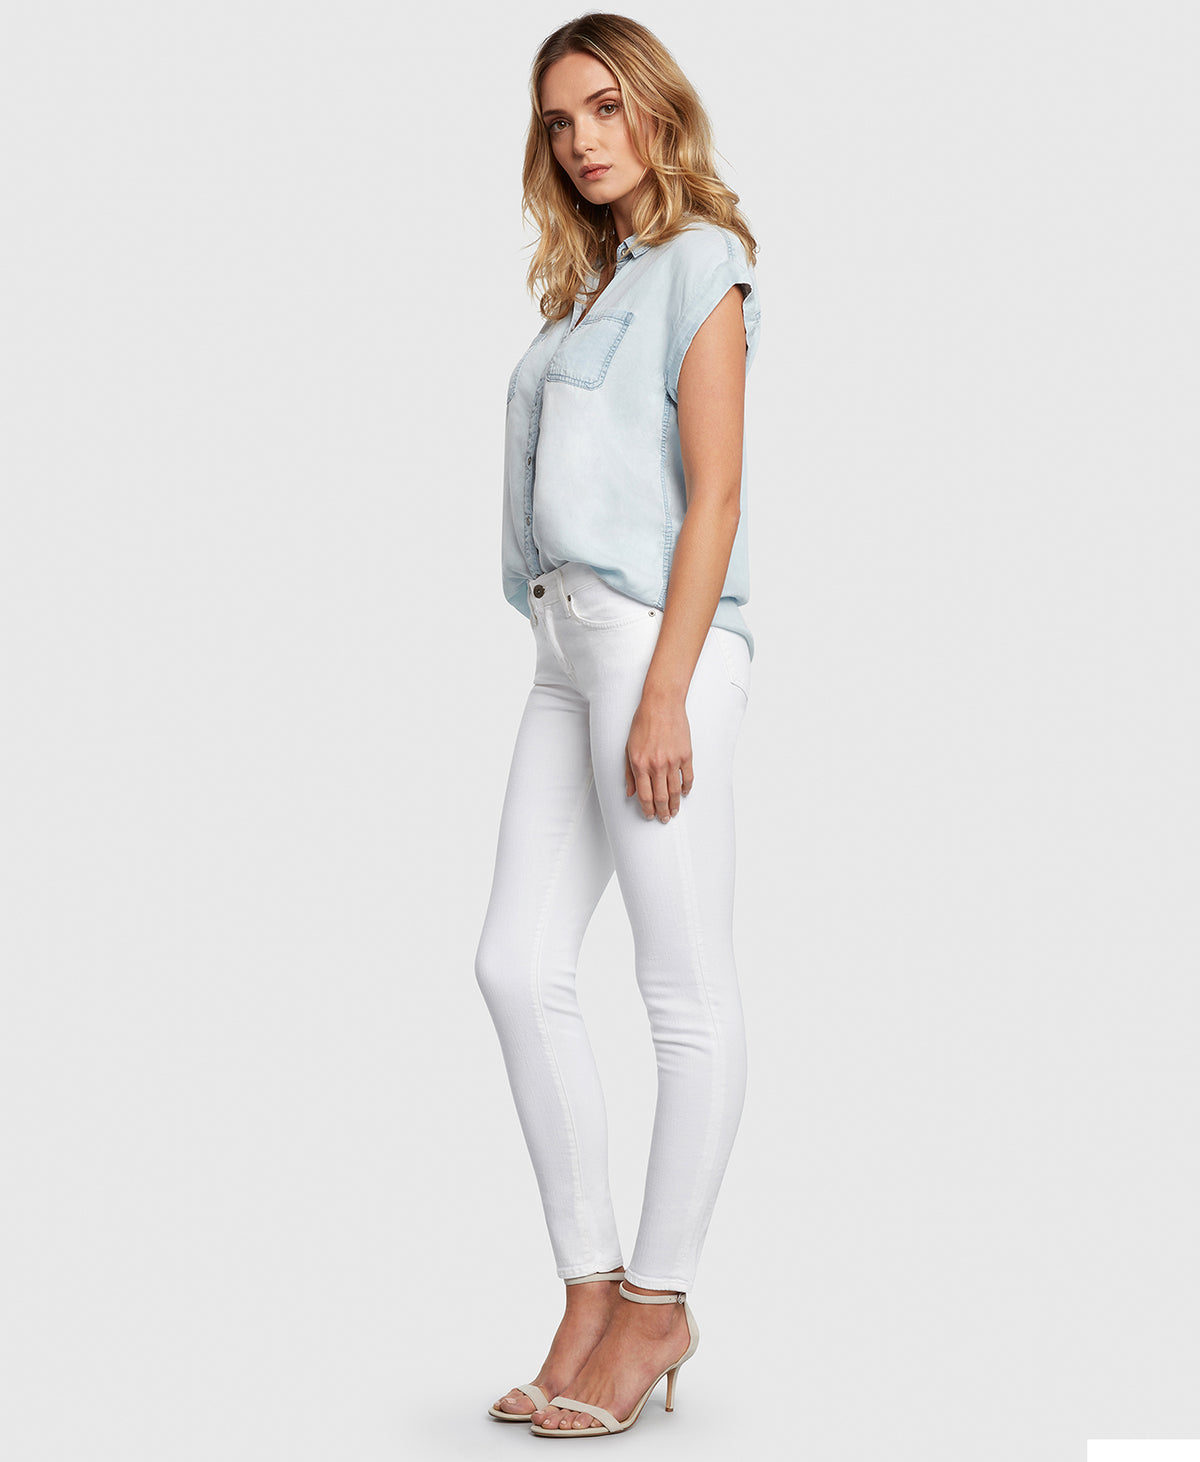 Principle DREAMER in White twill mid rise skinny jeans side